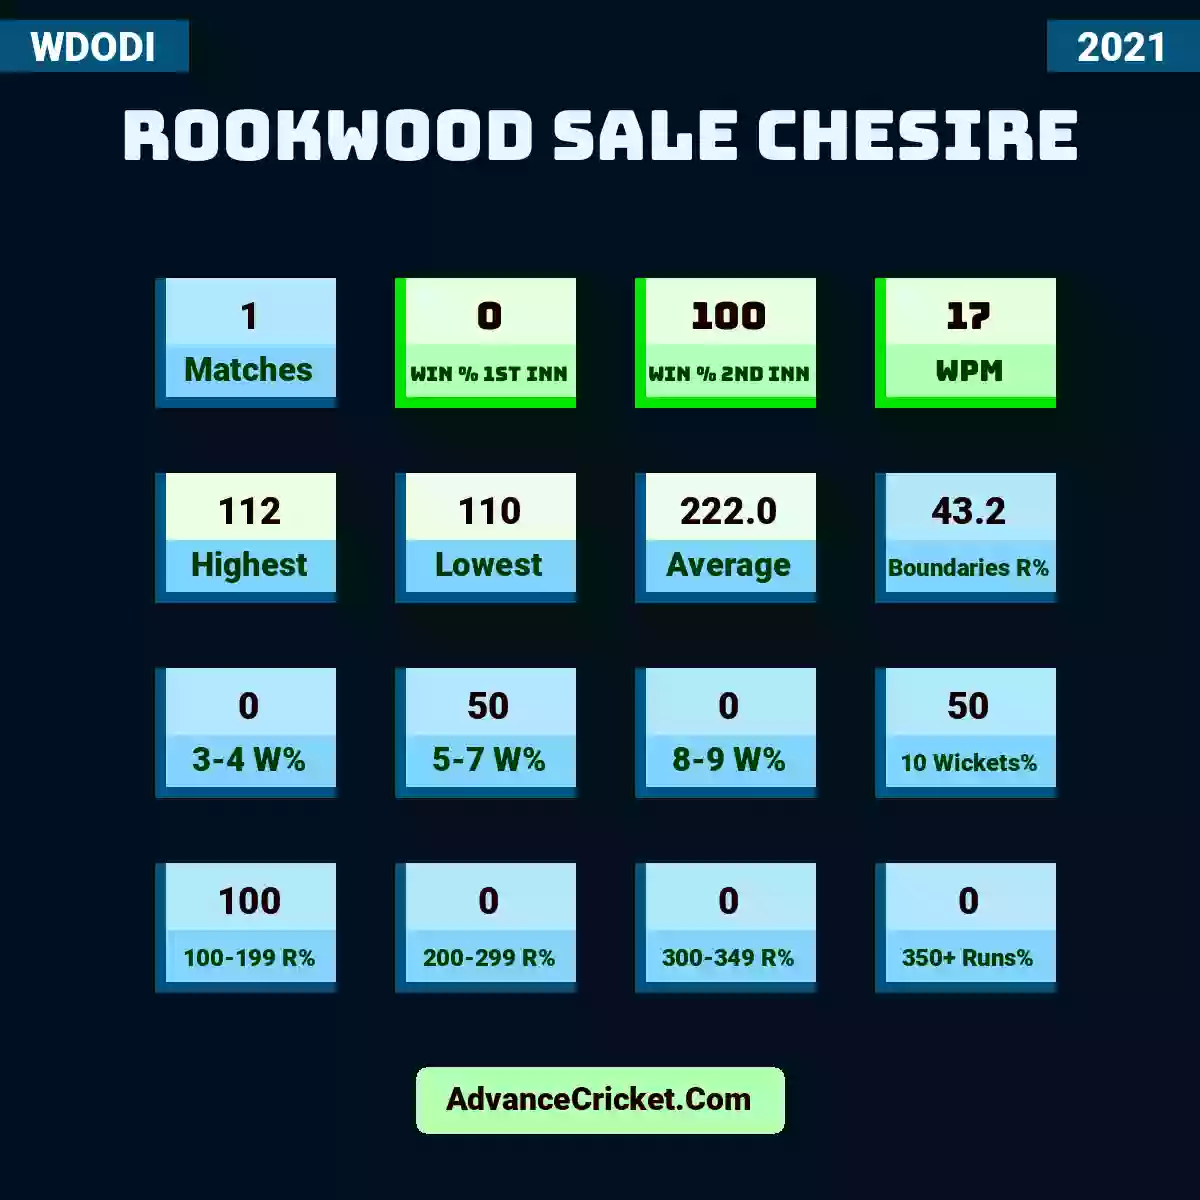 Image showing Rookwood Sale Chesire with Matches: 1, Win % 1st Inn: 0, Win % 2nd Inn: 100, WPM: 17, Highest: 112, Lowest: 110, Average: 222.0, Boundaries R%: 43.2, 3-4 W%: 0, 5-7 W%: 50, 8-9 W%: 0, 10 Wickets%: 50, 100-199 R%: 100, 200-299 R%: 0, 300-349 R%: 0, 350+ Runs%: 0.